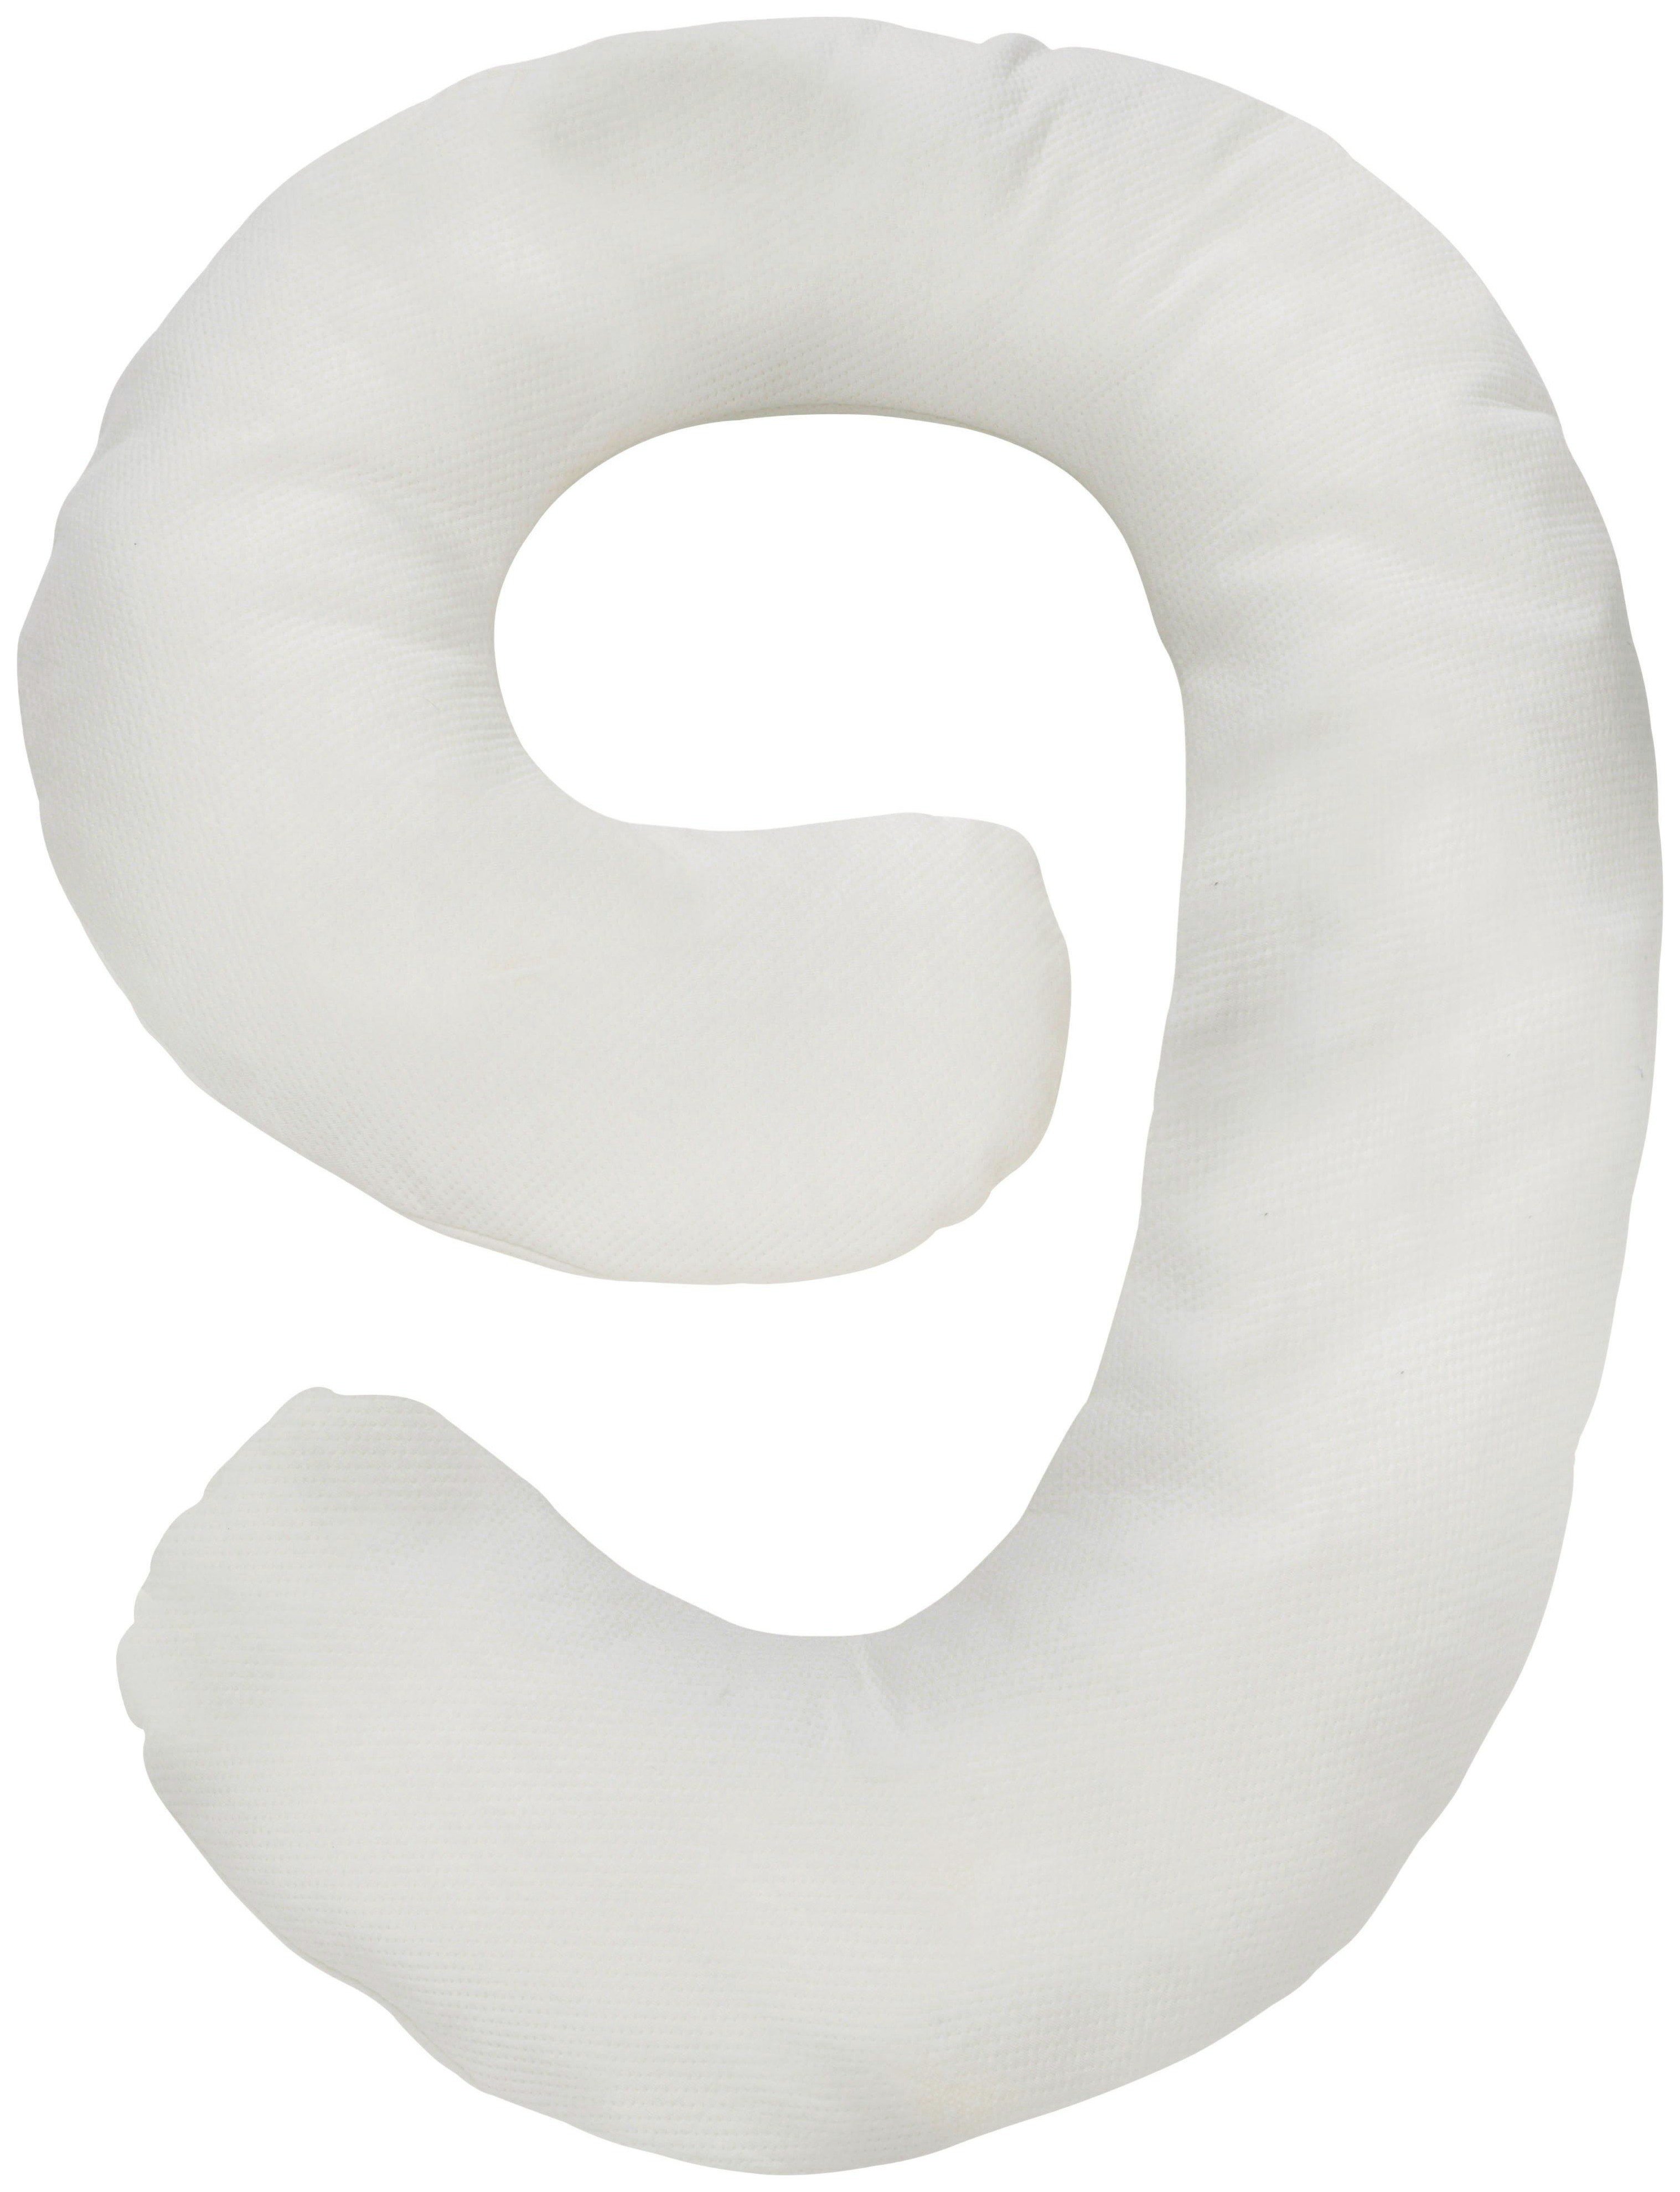 By Carla Heat Regulating Cuddle Me Pregnancy Support Pillow